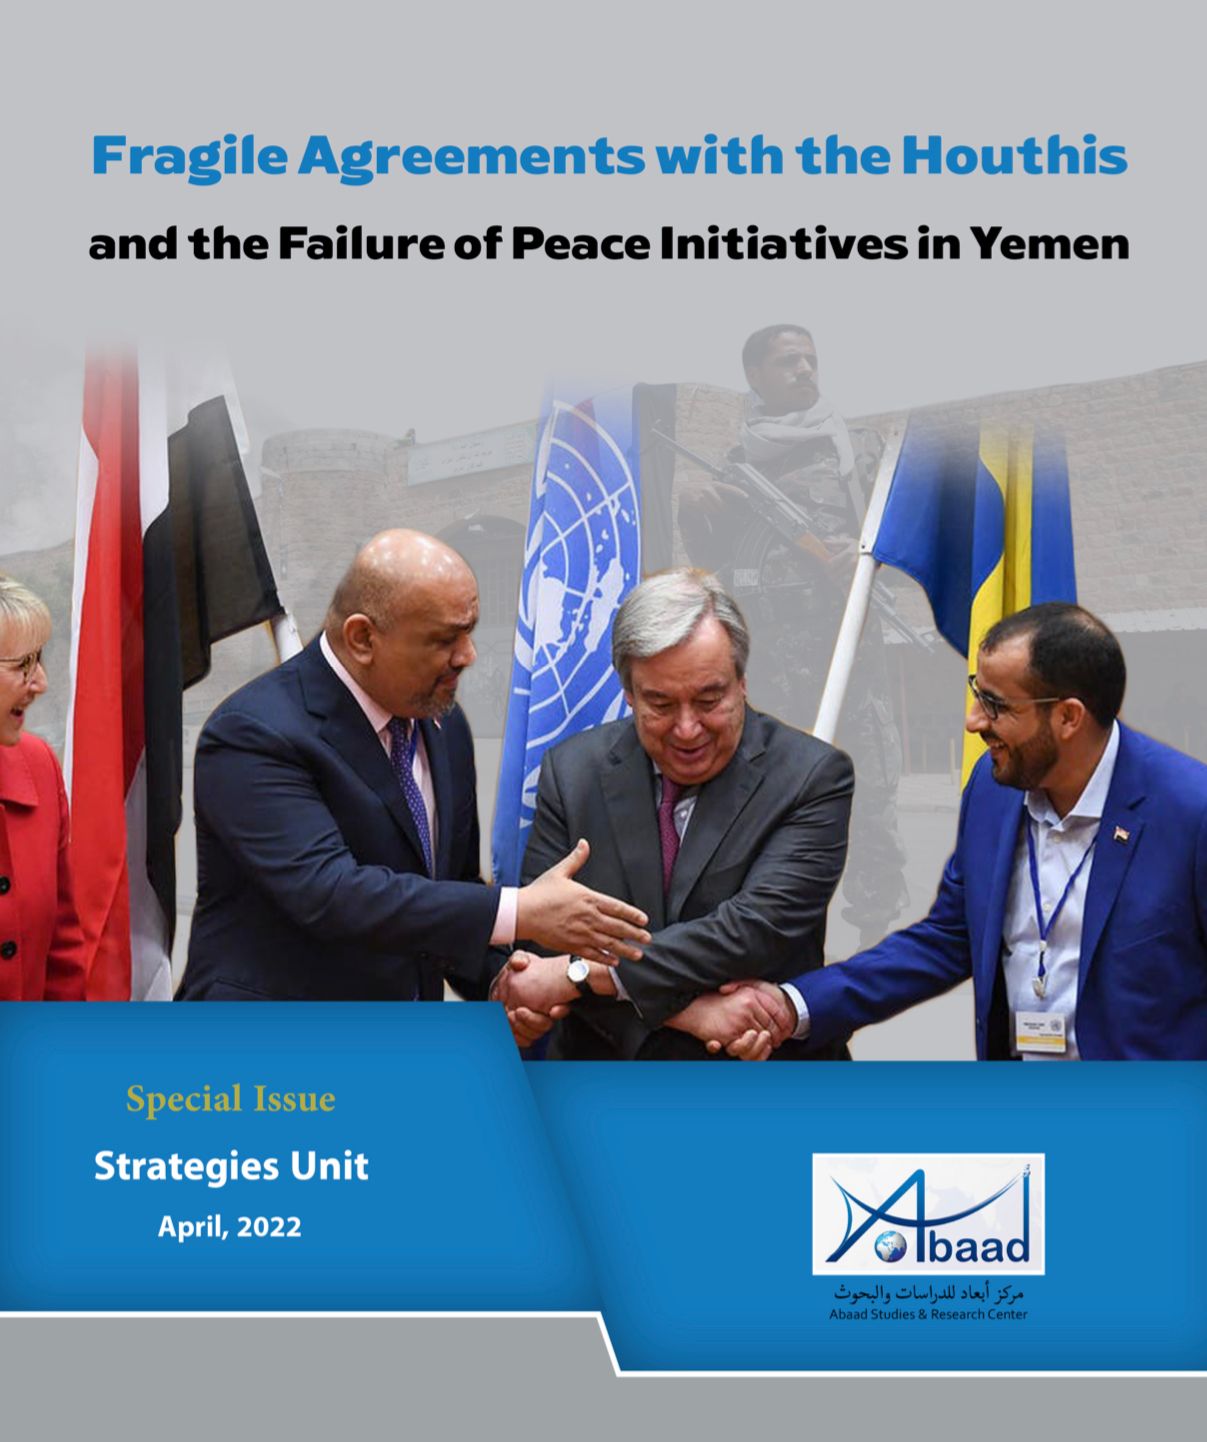  Fragile Agreements with the Houthis and the Failure of Peace Initiatives in Yemen